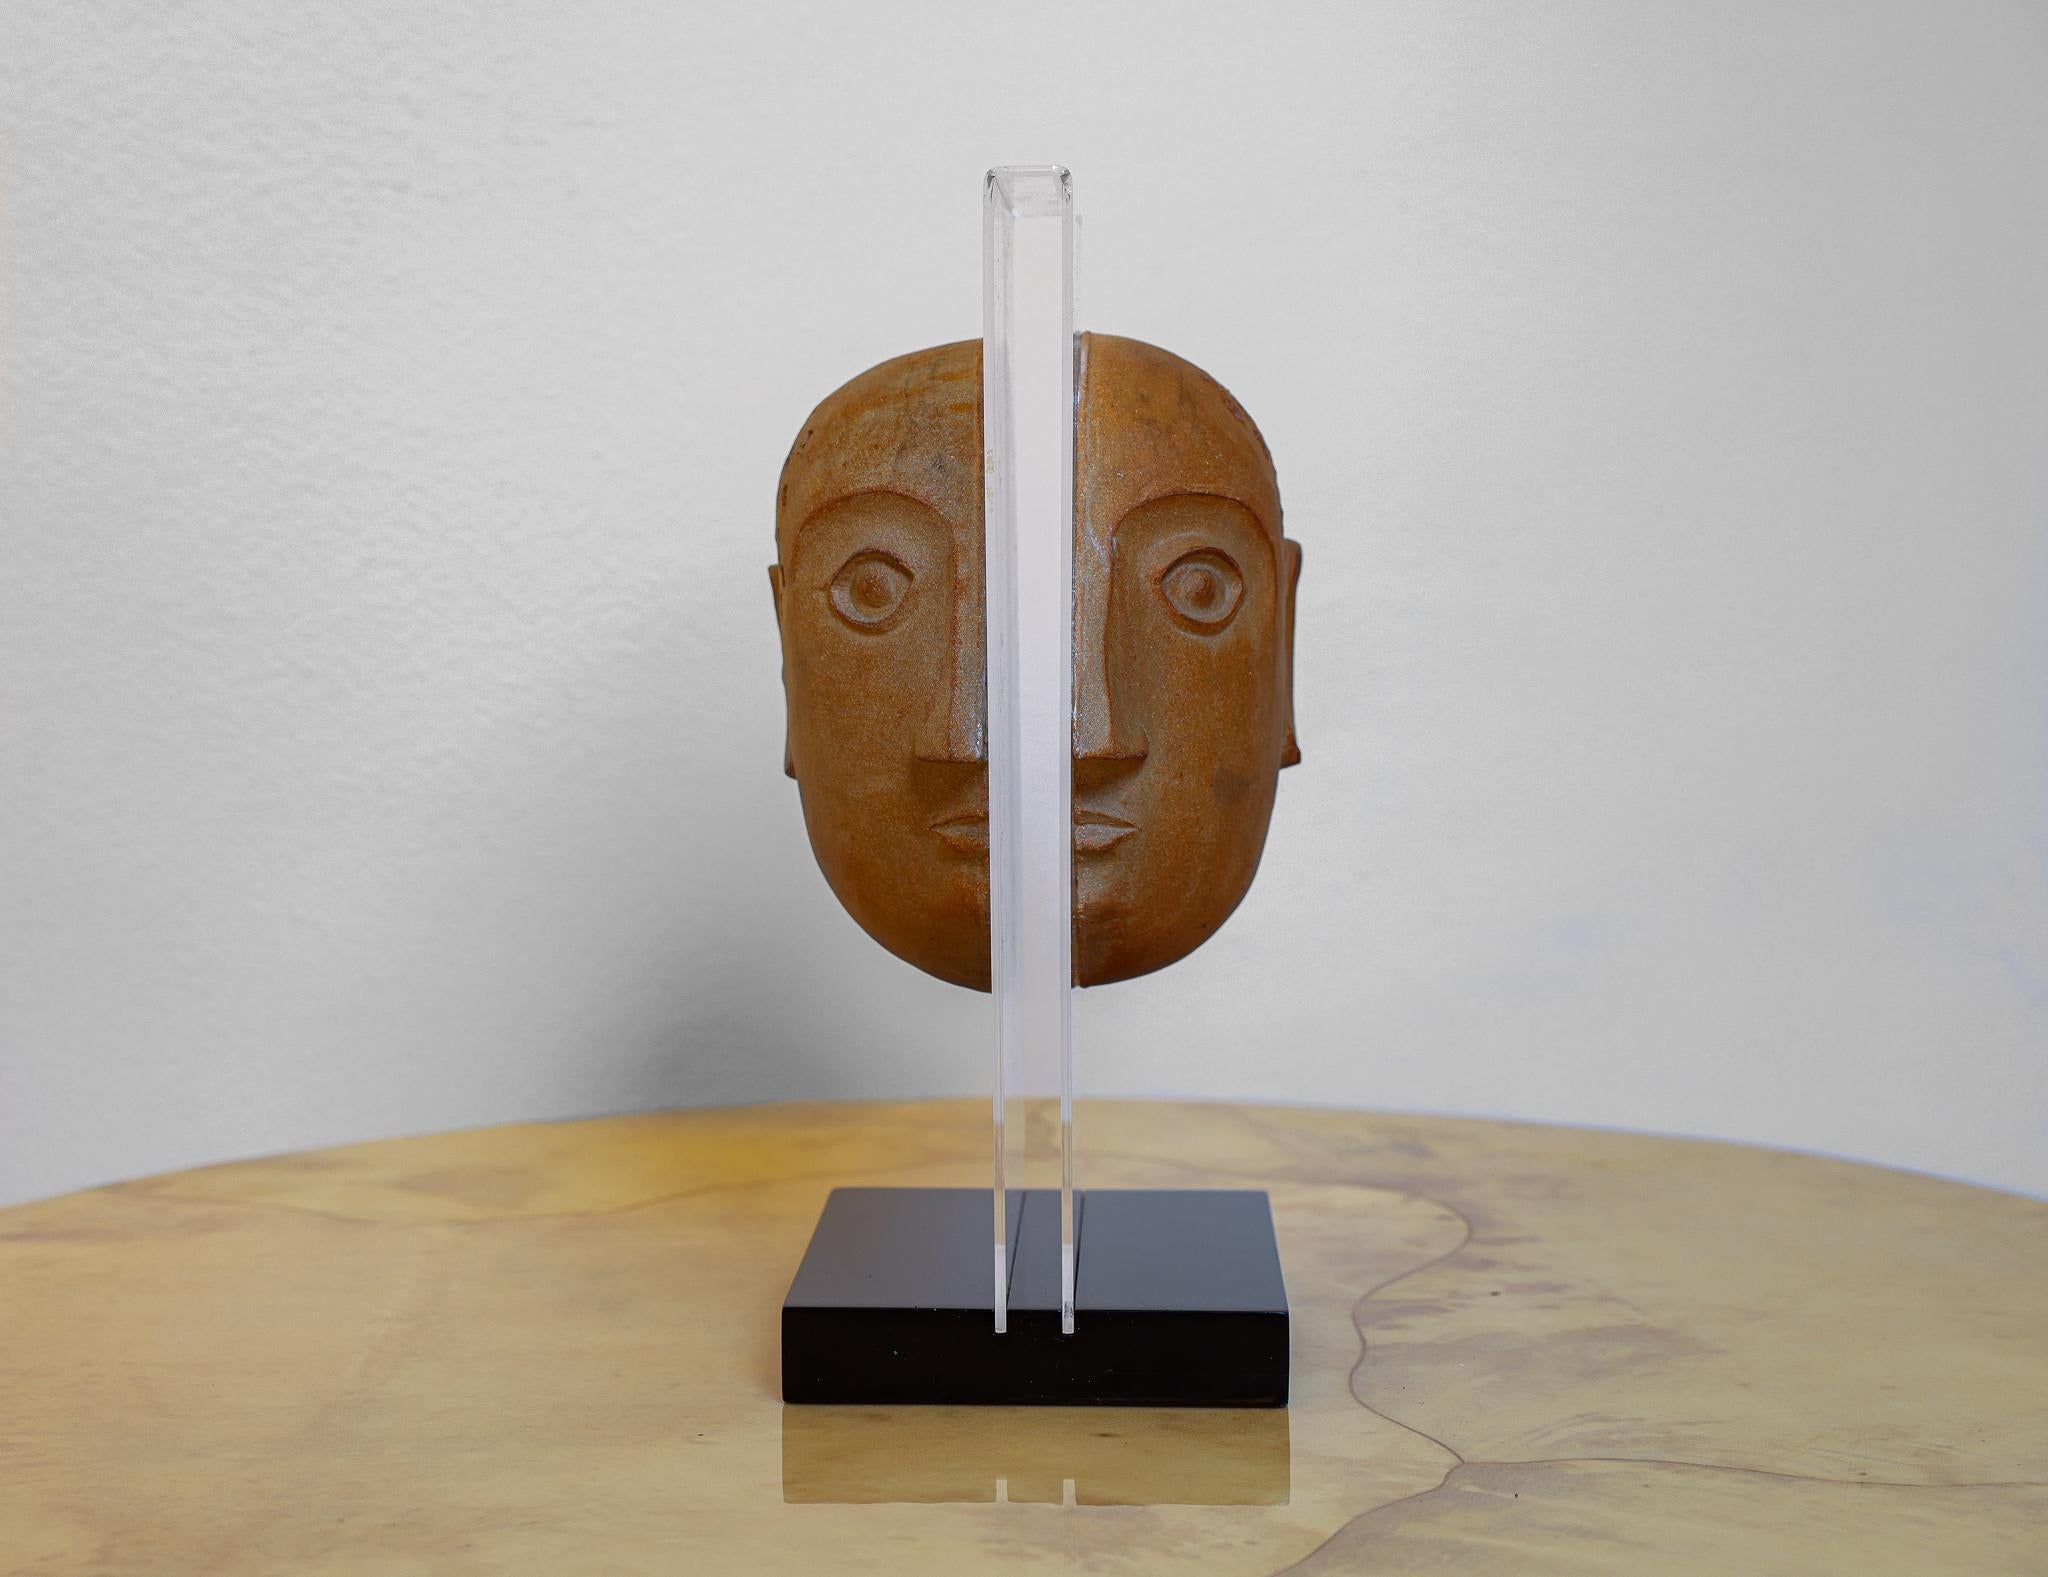 This is an interesting sculpture for Bennington Potters by artist David Gill (1922-2002) depicting a head with imprinted numbers made of two halves. The two stoneware halves are attached to a piece of lucite that is attached to a rectangular